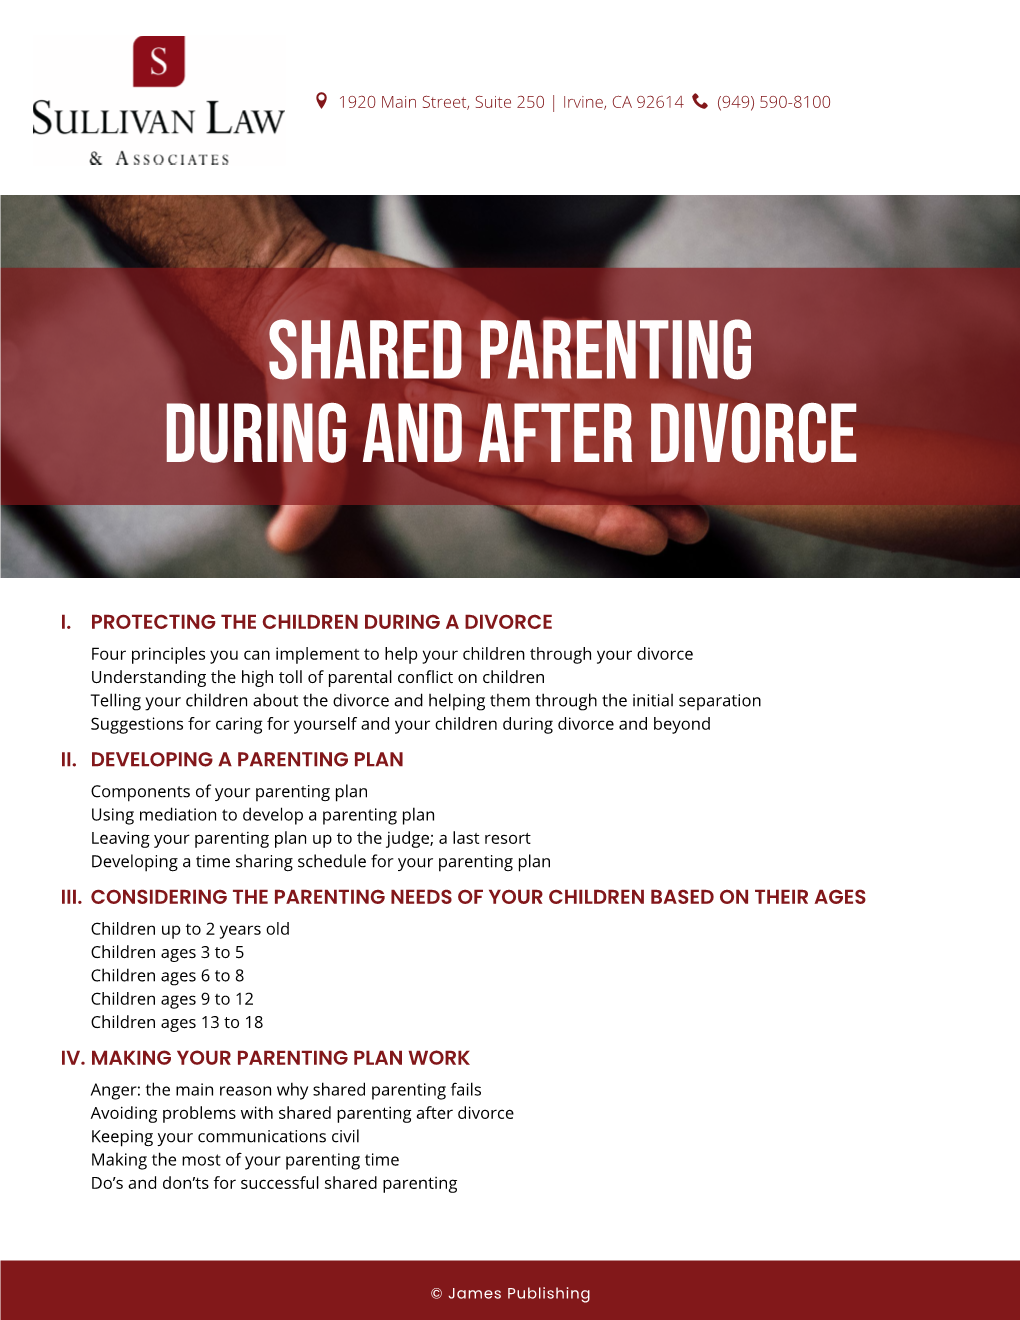 Shared Parenting During and After Divorce